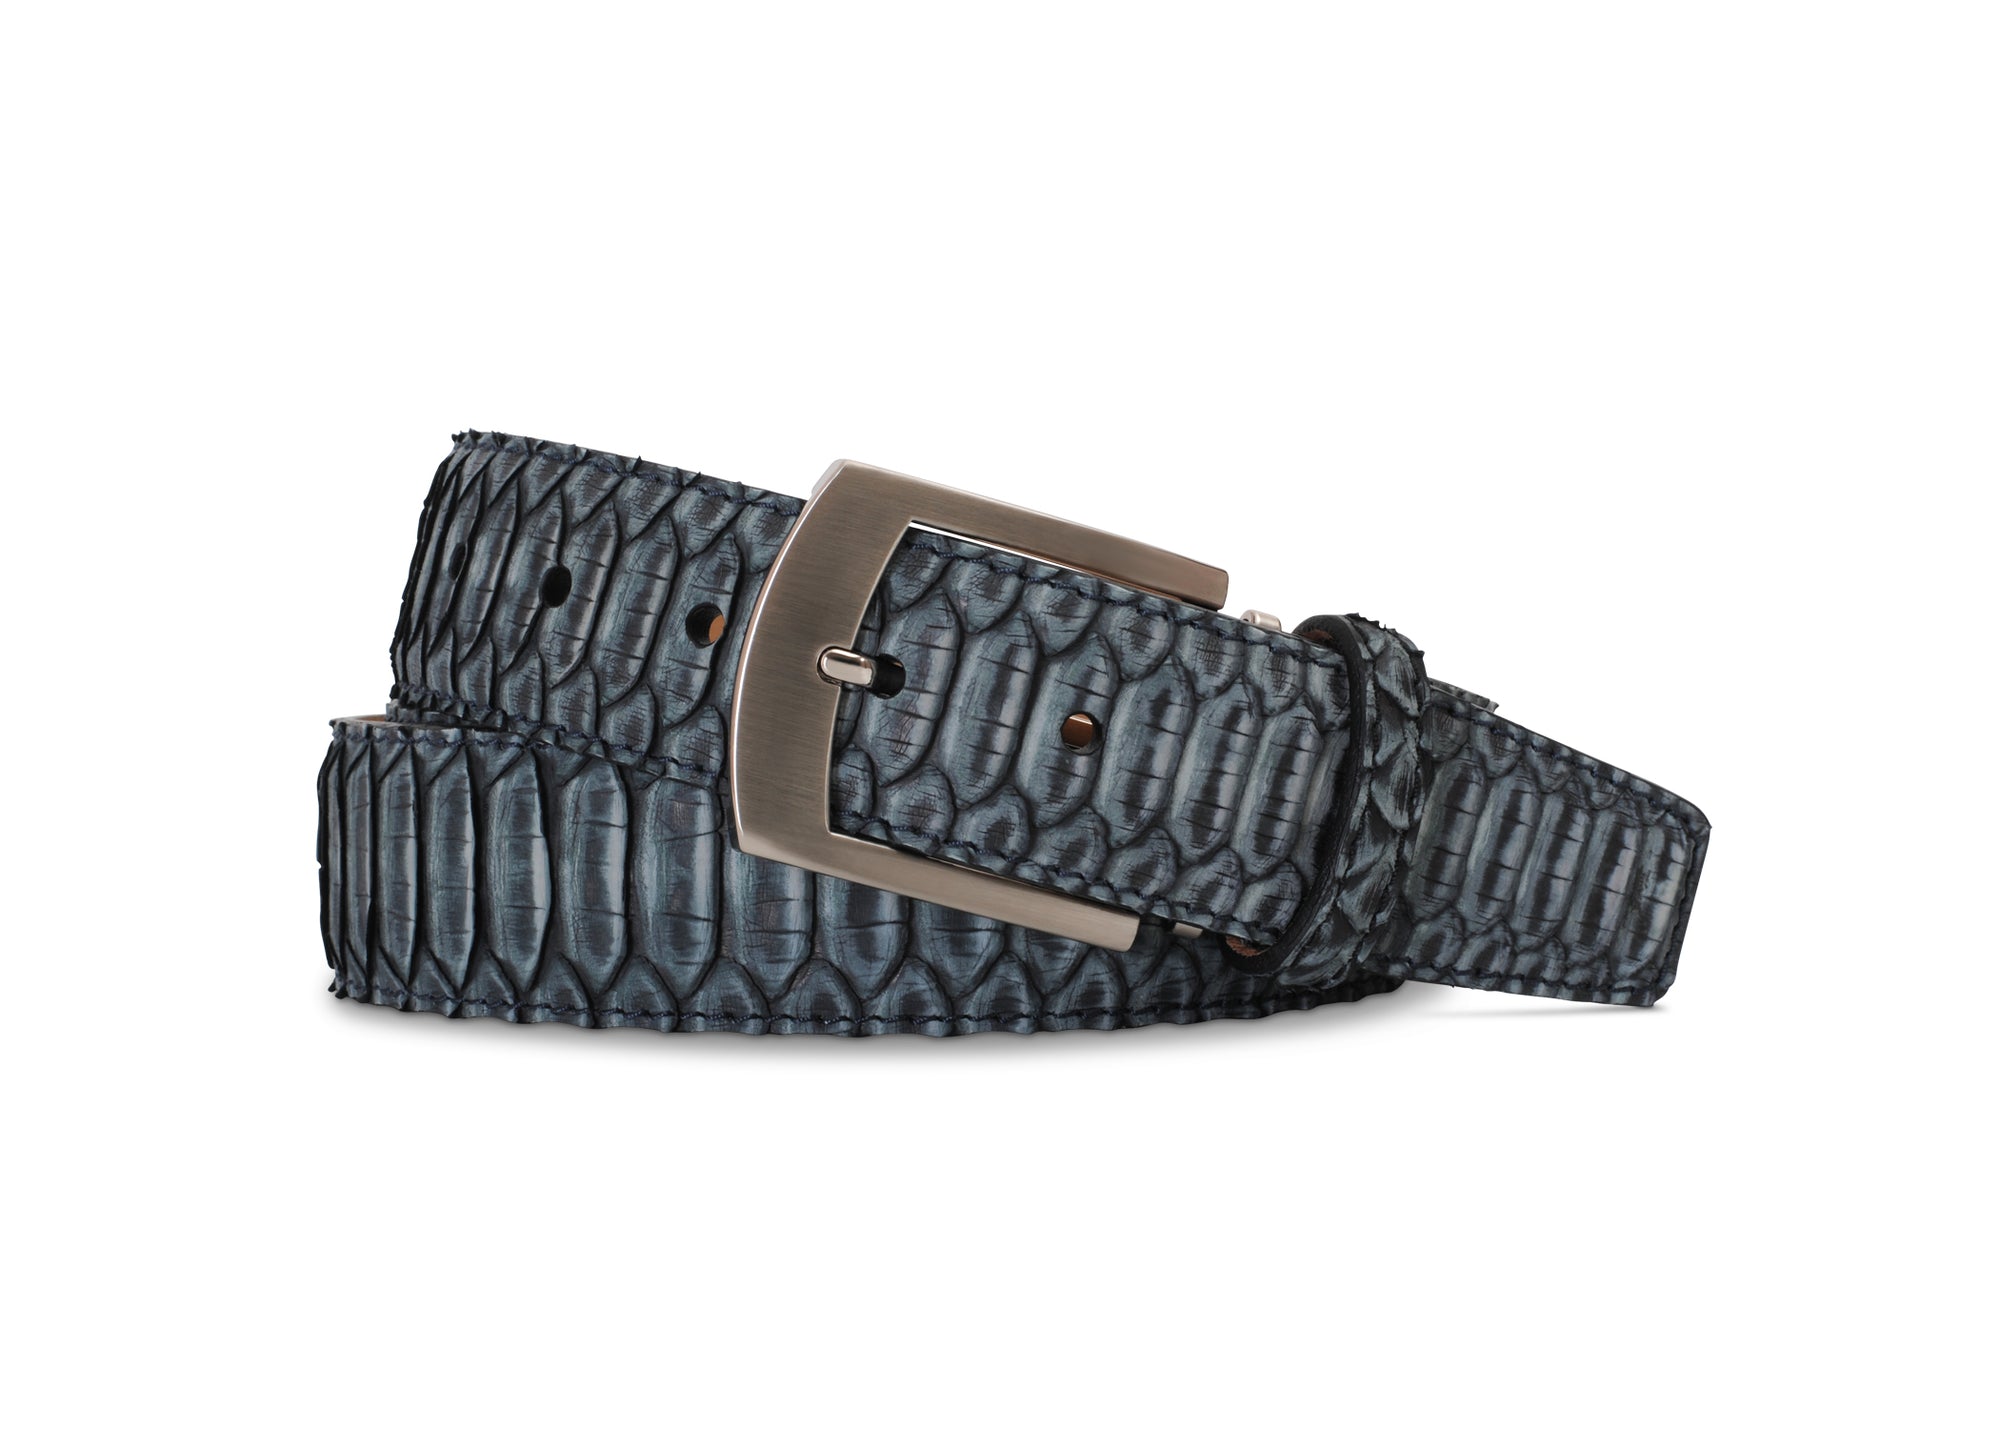 Sueded Back-Cut Python Belt in Black by Brookes & Hyde